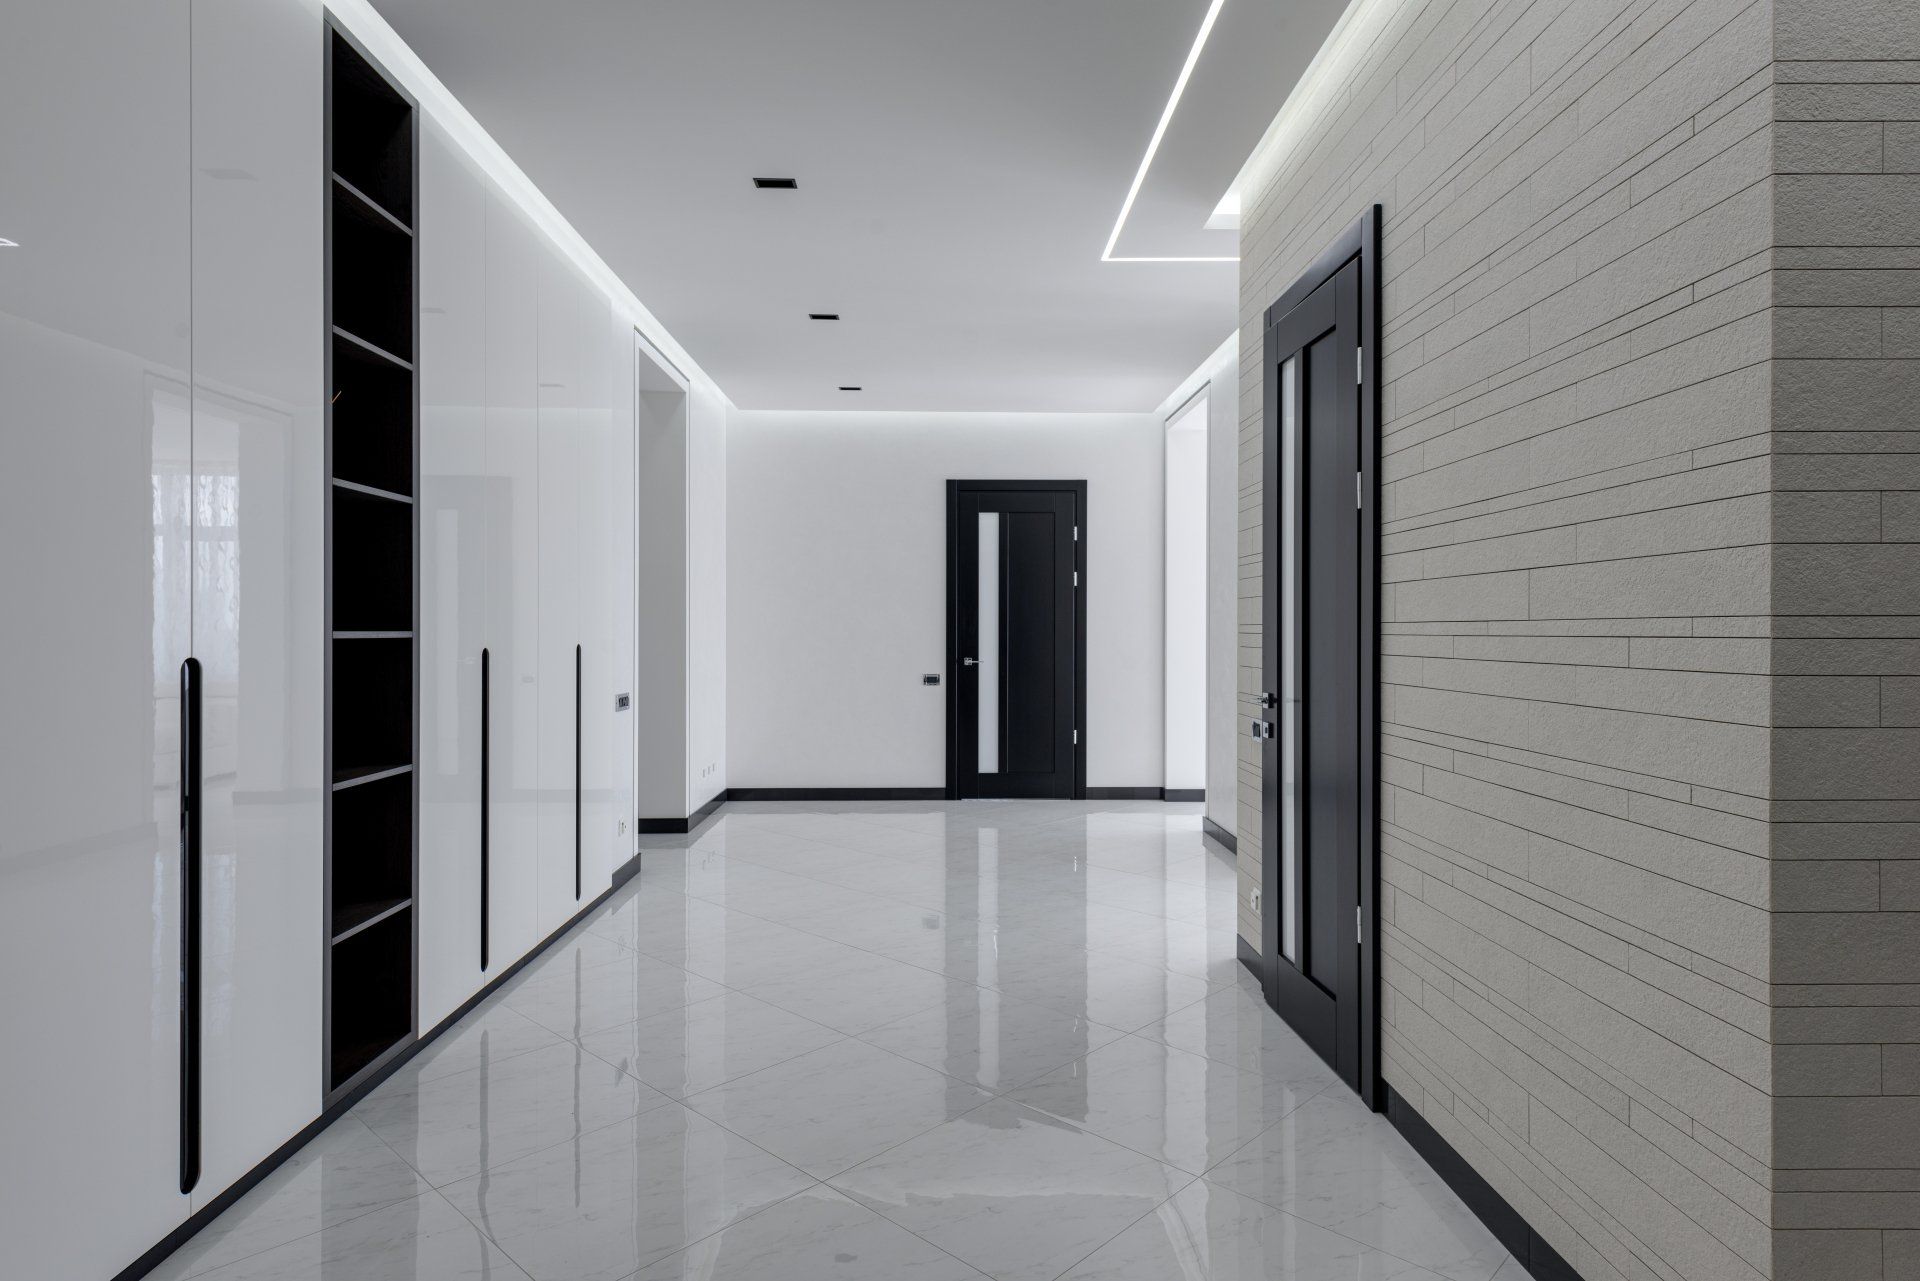 An empty hallway with white walls and a black door.